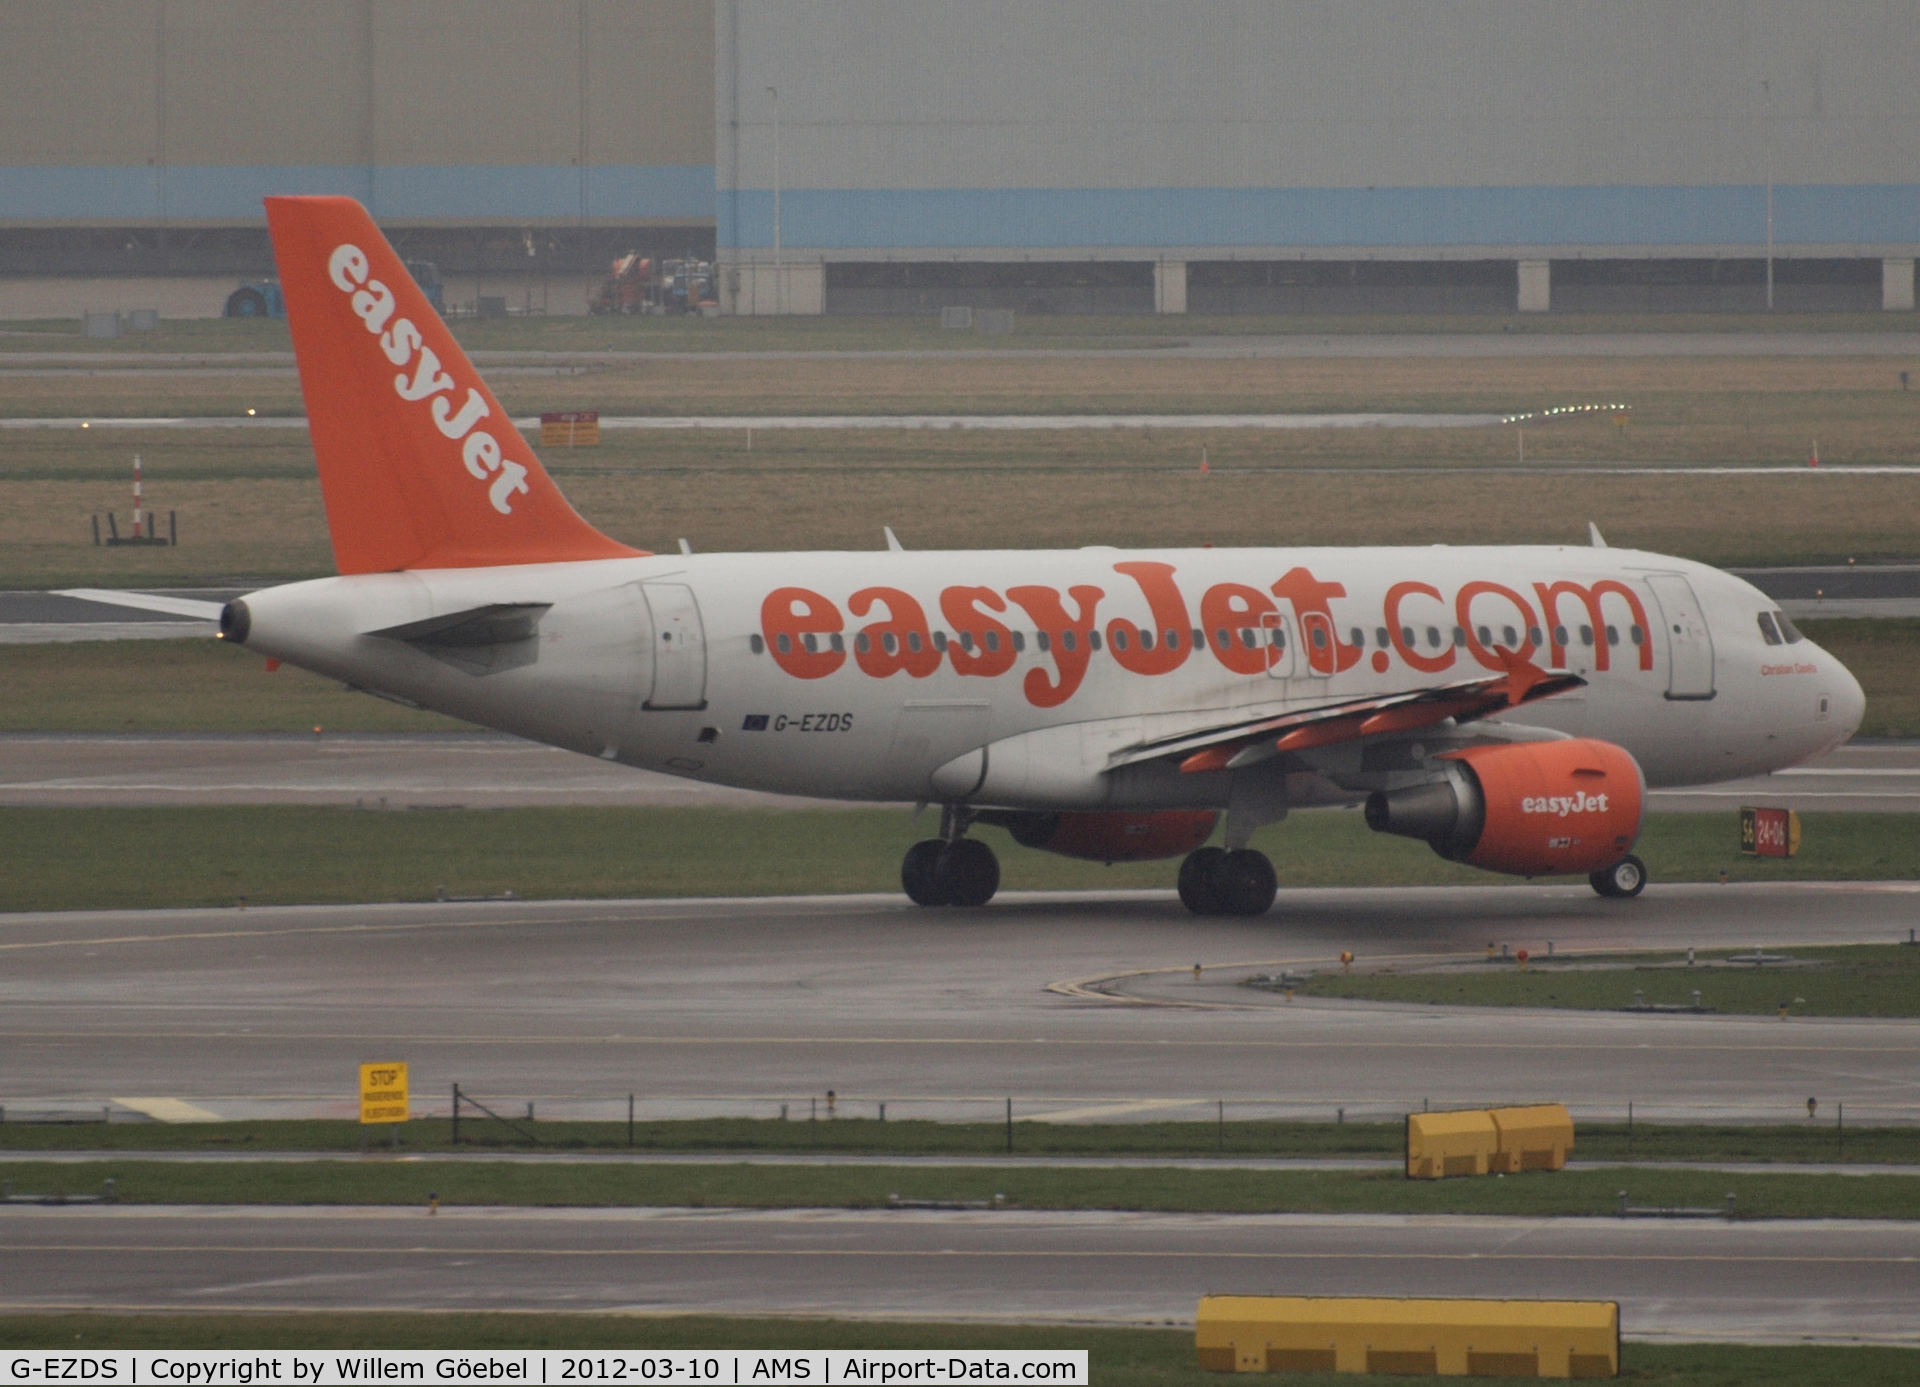 G-EZDS, 2008 Airbus A319-111 C/N 3702, Taxi to runway 24 of Schiphol Airport